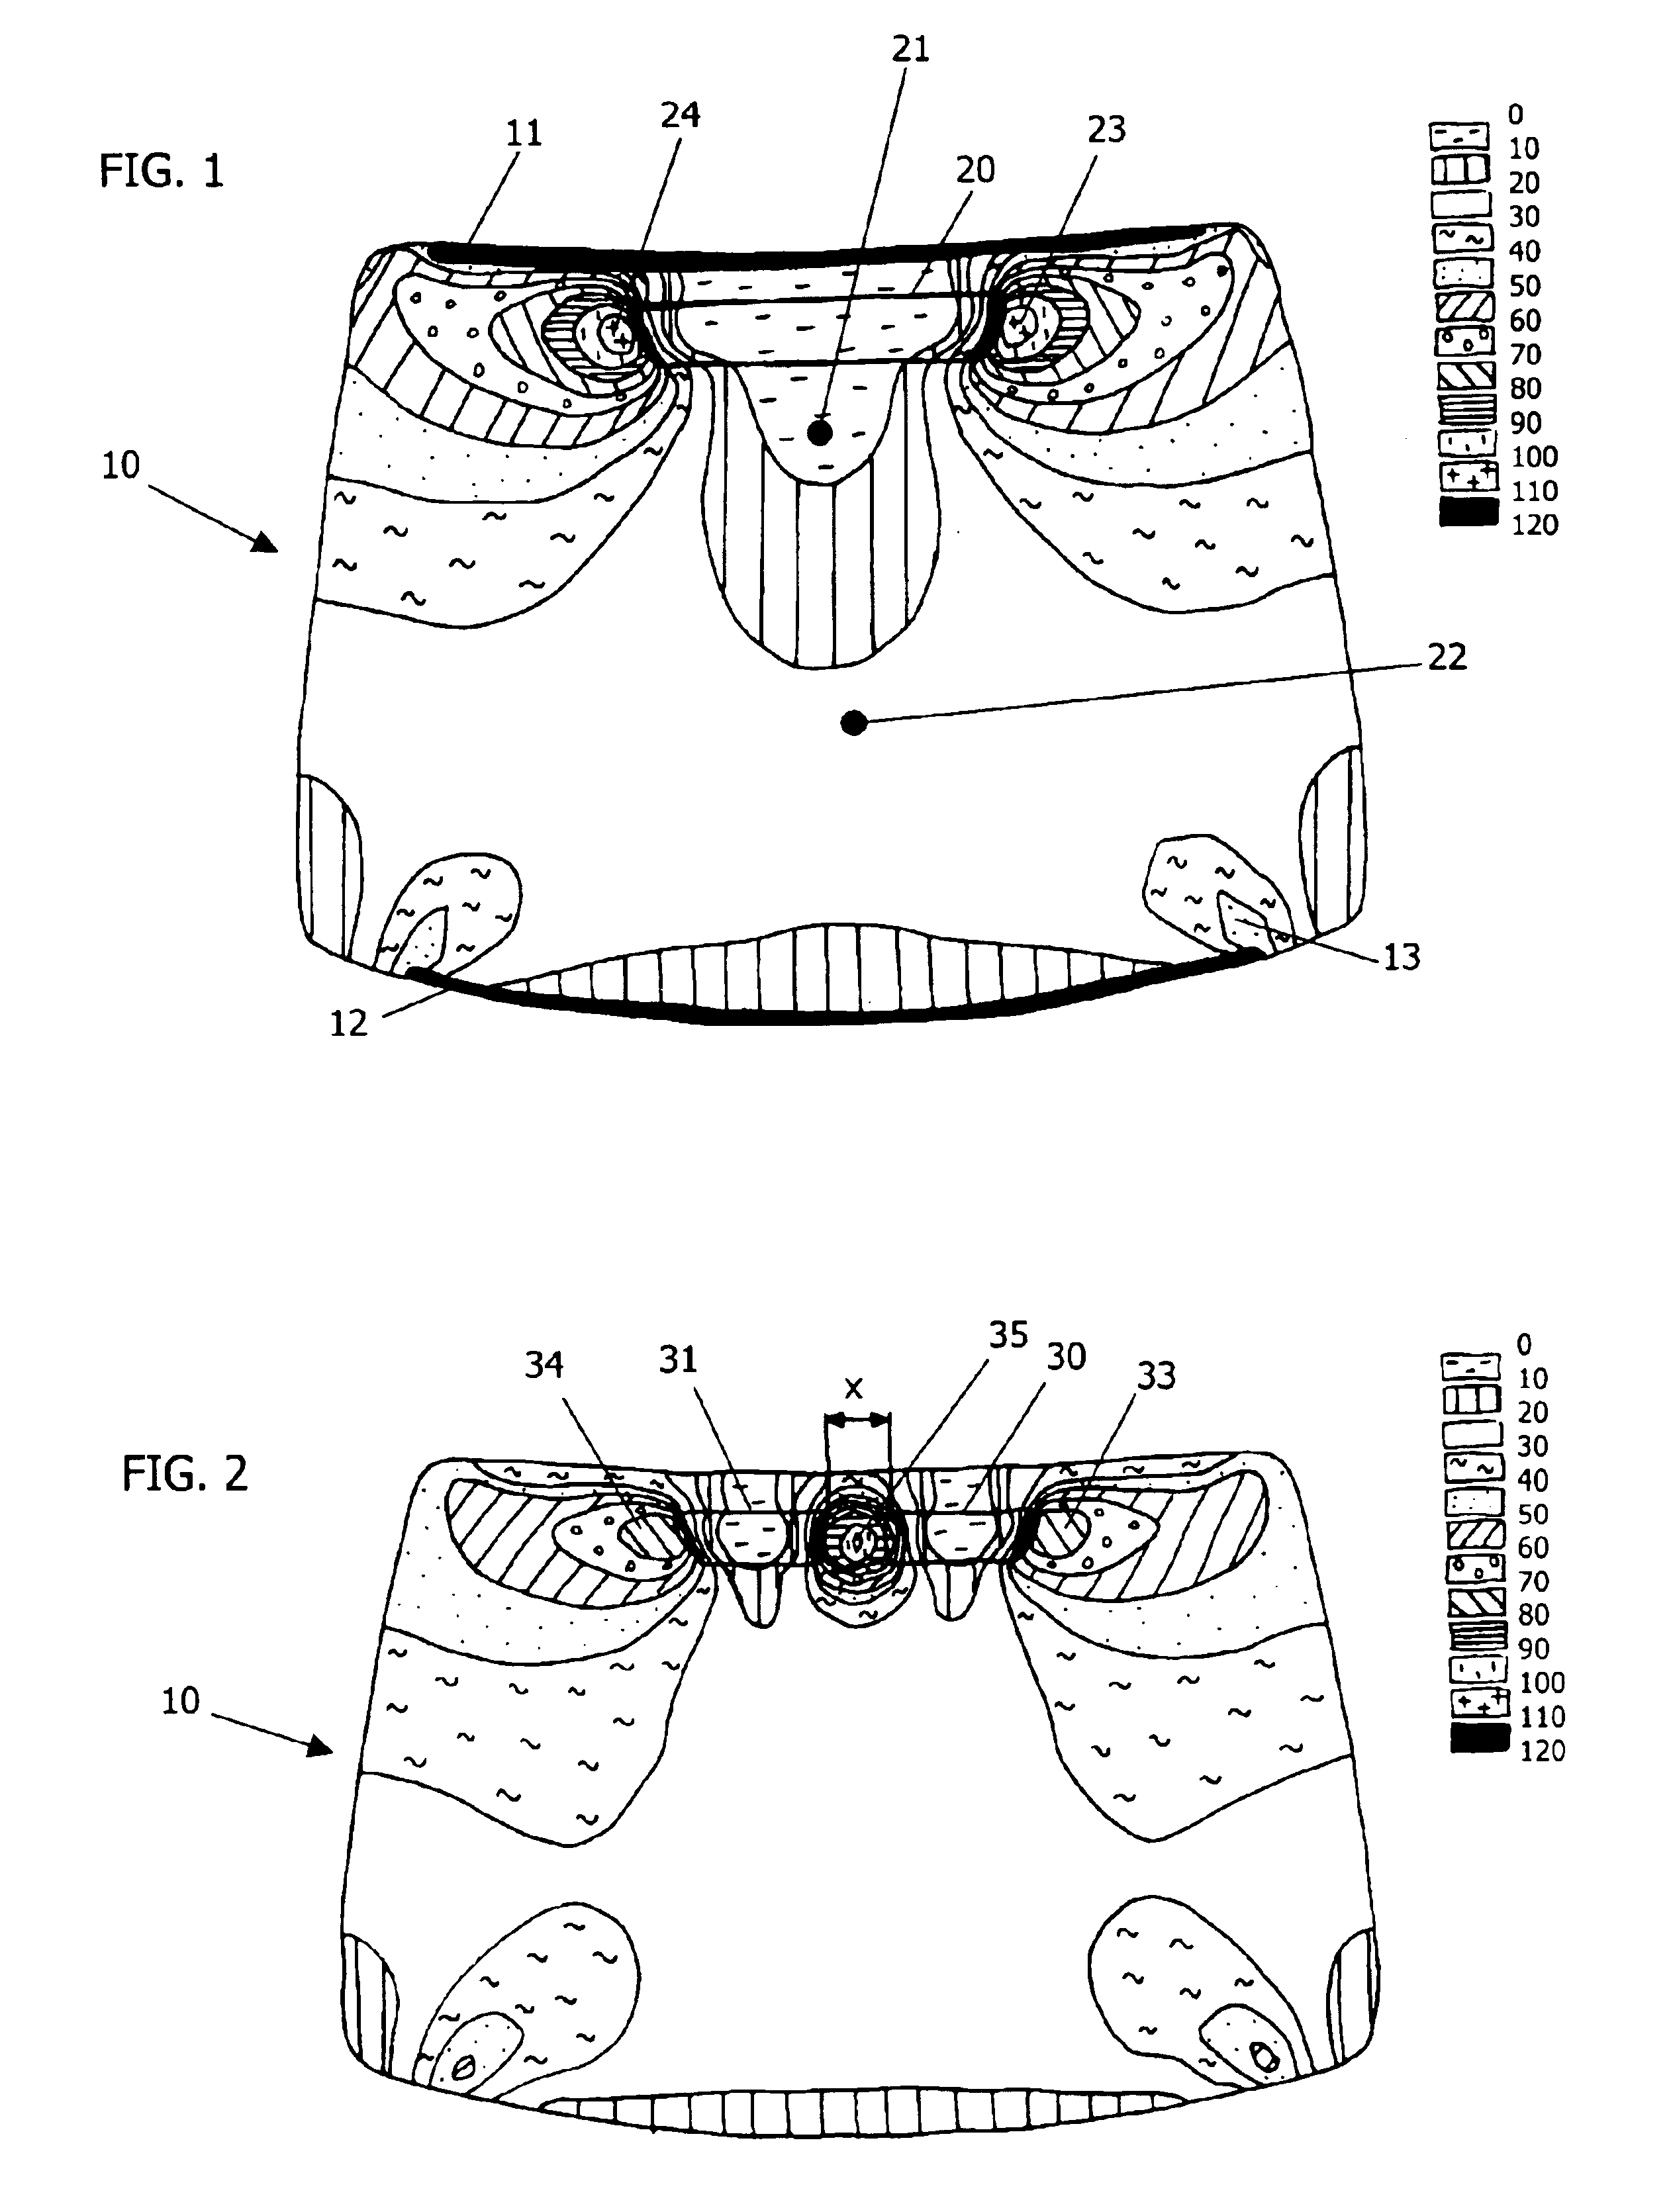 Automotive glazing panel having an electrically heatable solar control coating layer provided with data transmission windows